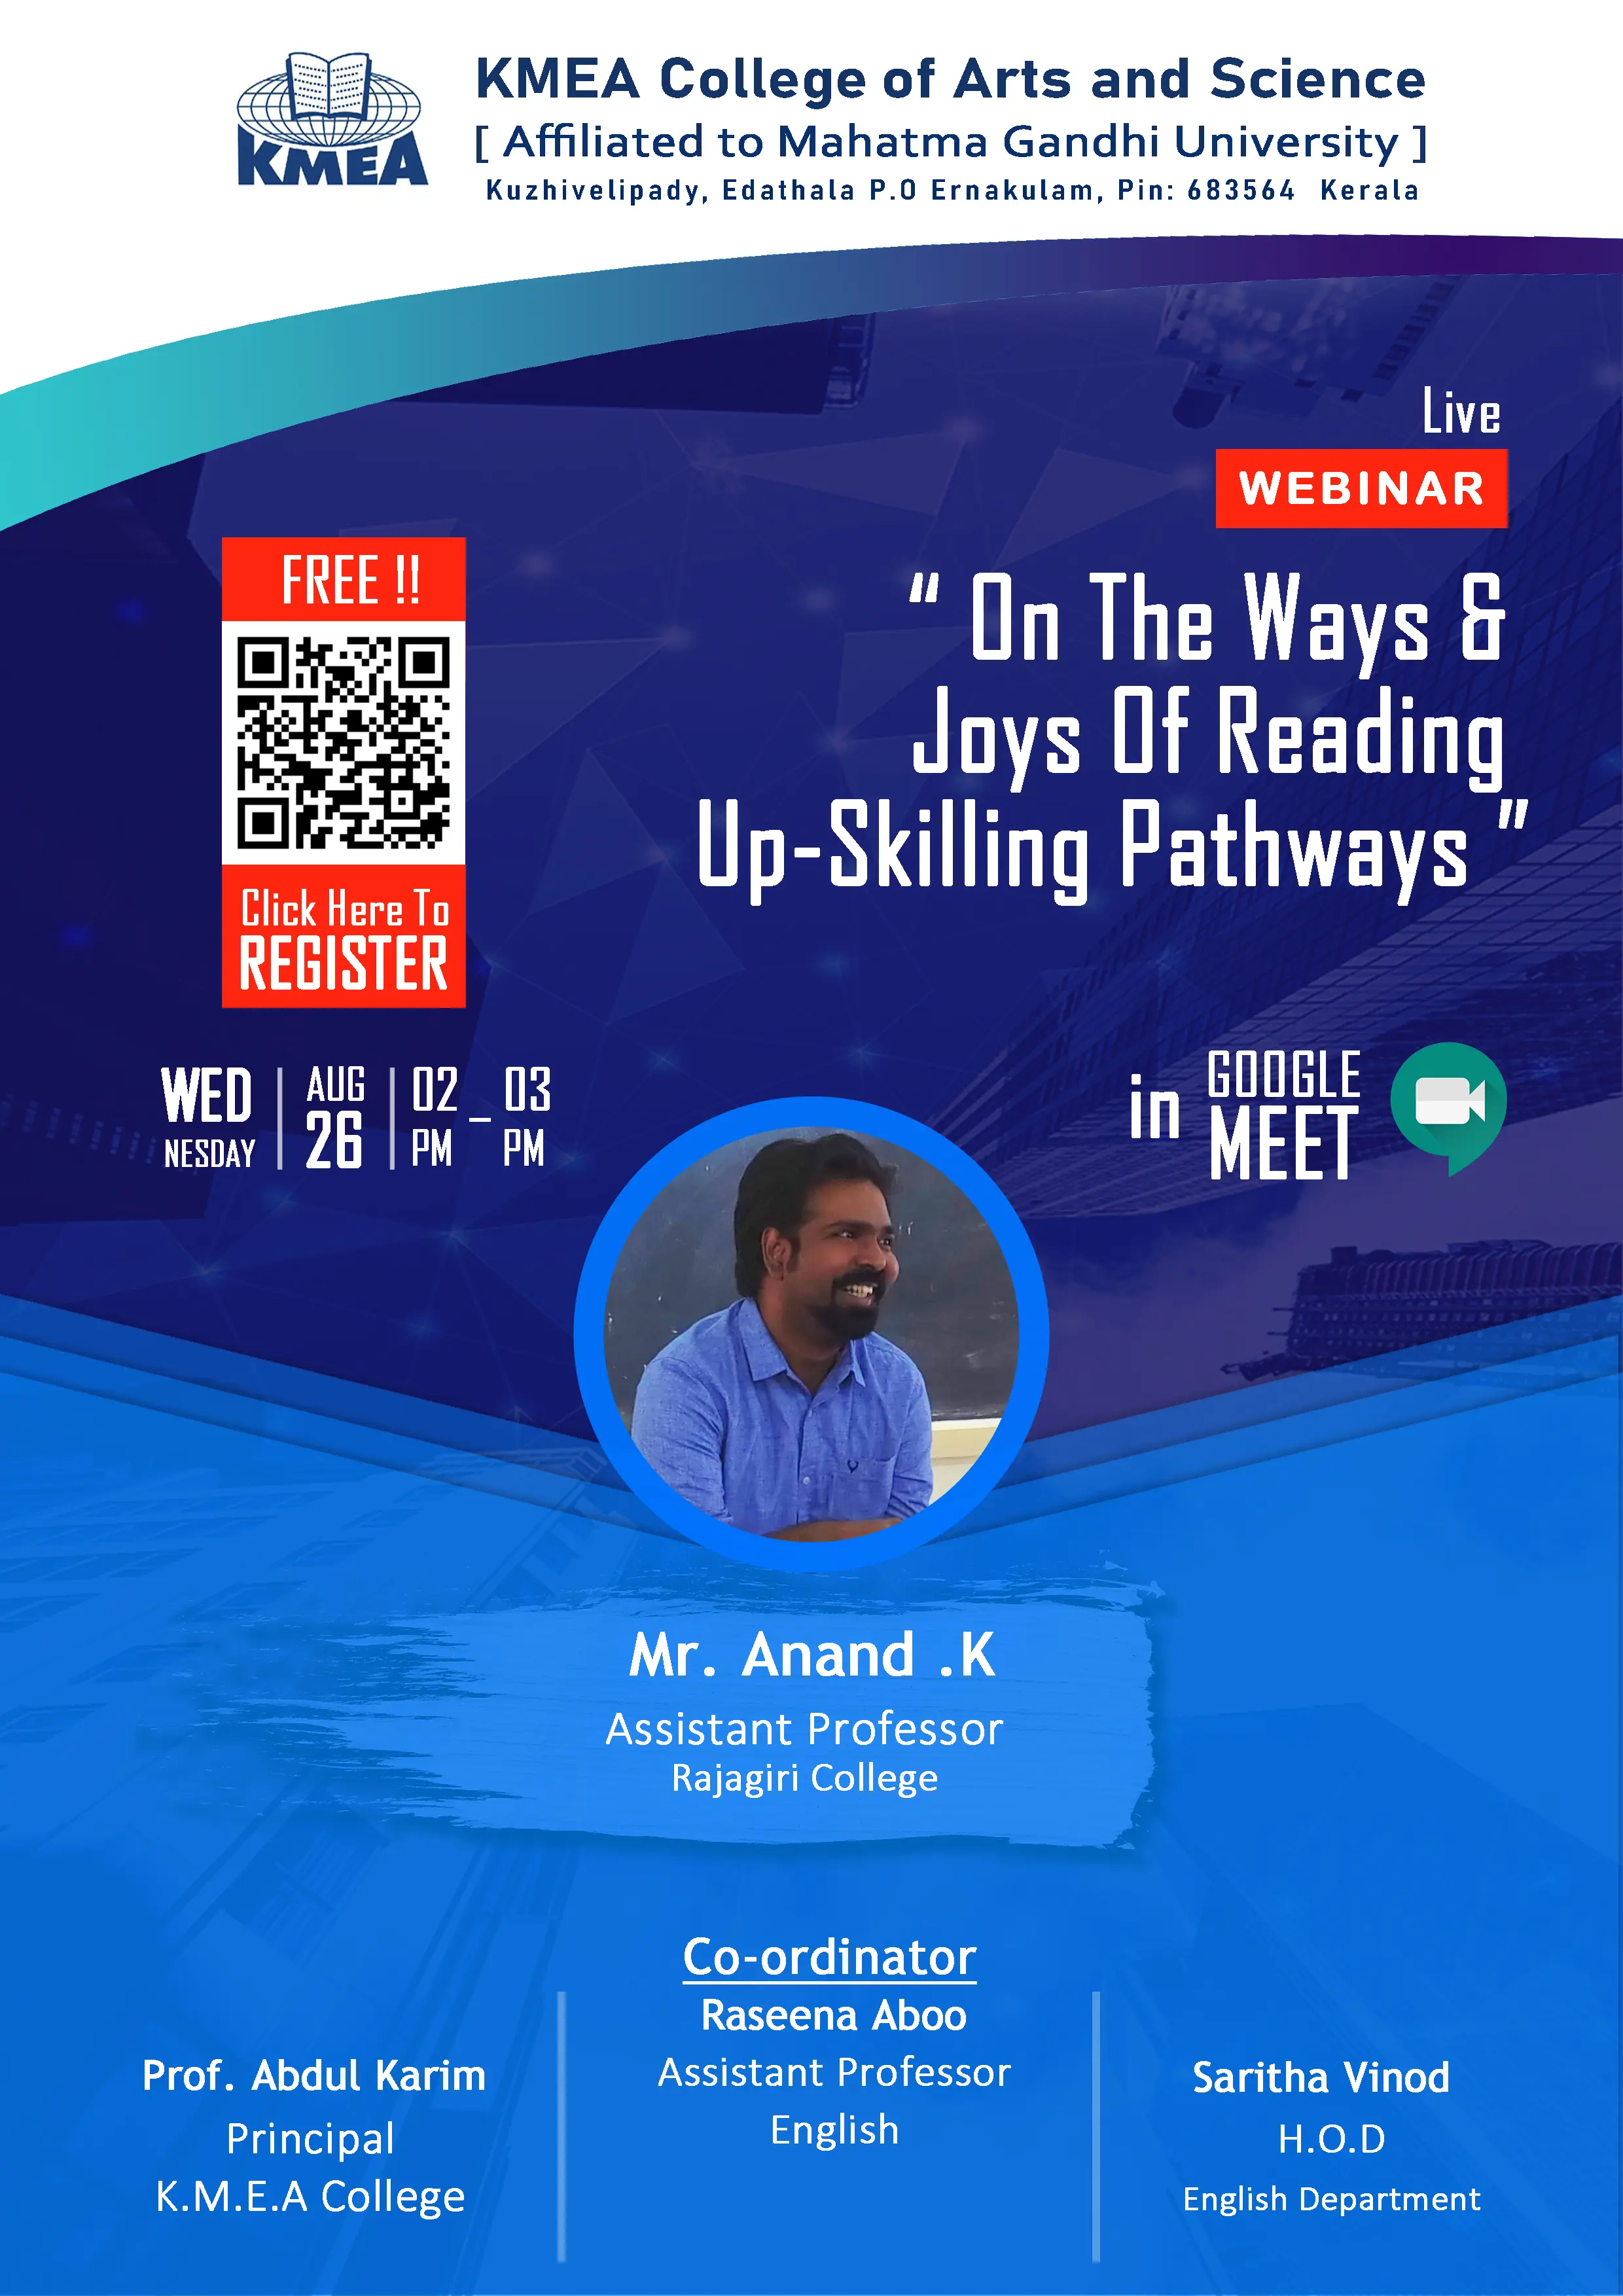 Department of English organized a Webinar  "On the Ways and Joys of Reading Up-Skilling Pathways" on 26th August 2020. 